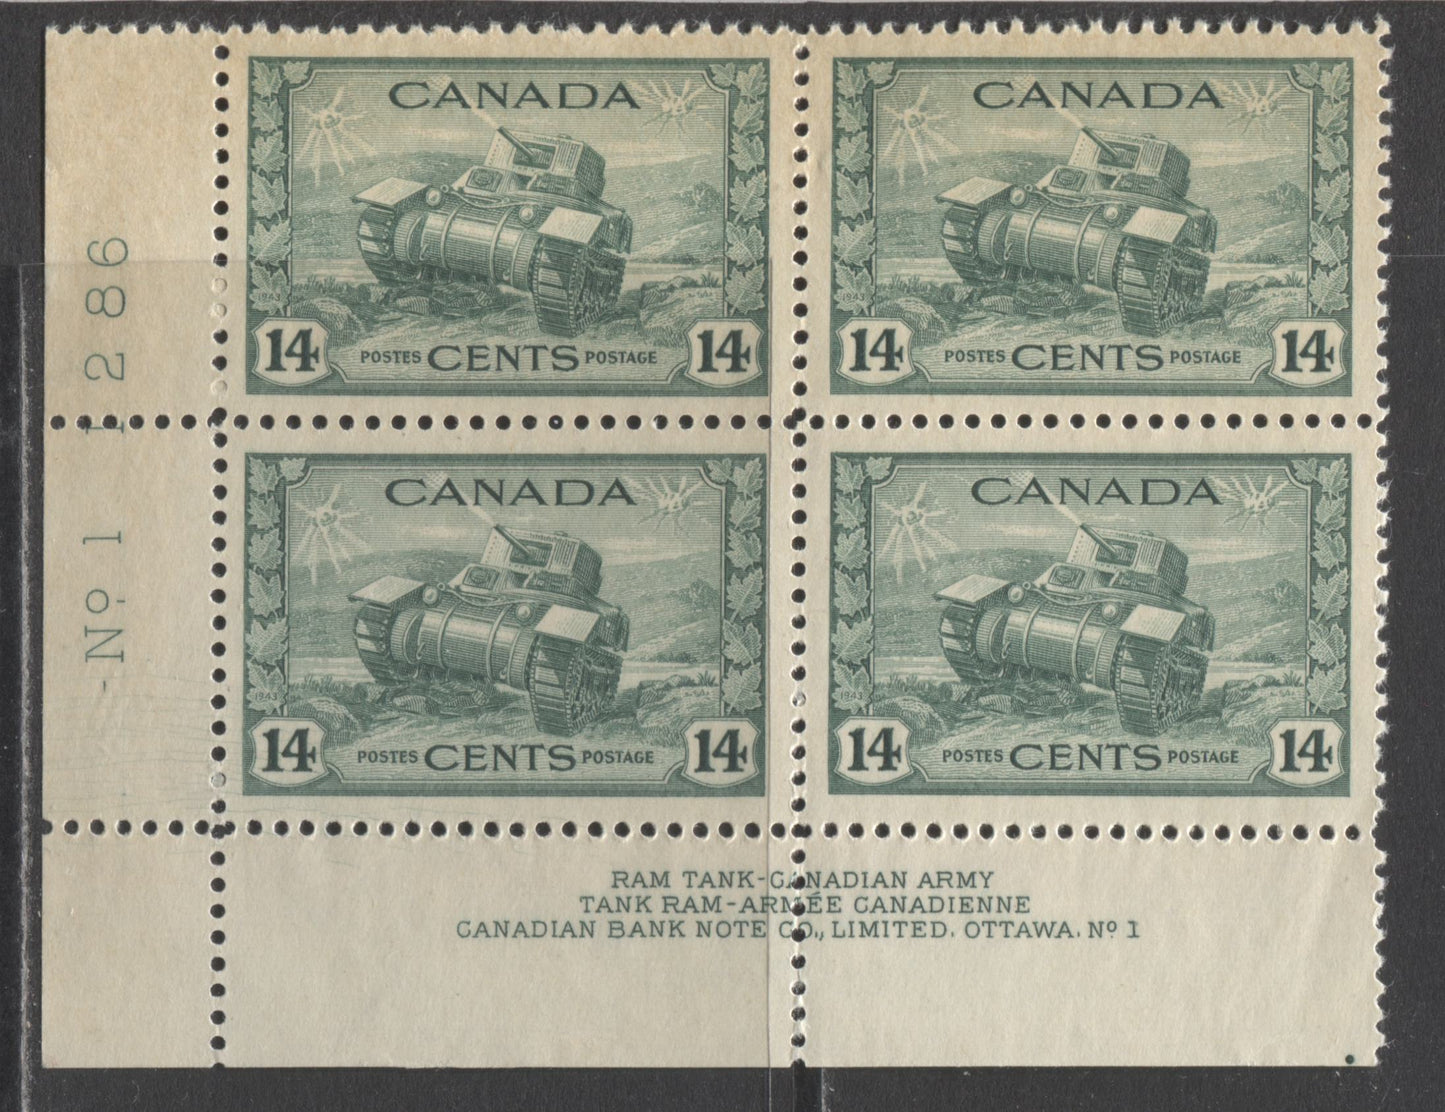 Lot 289 Canada #259i 14c Dull Green Ram Tank, 1942-1943 KGVI War Issue, A FNH LL Plate 1 Block Of 4 With Hairlines at Lower Left